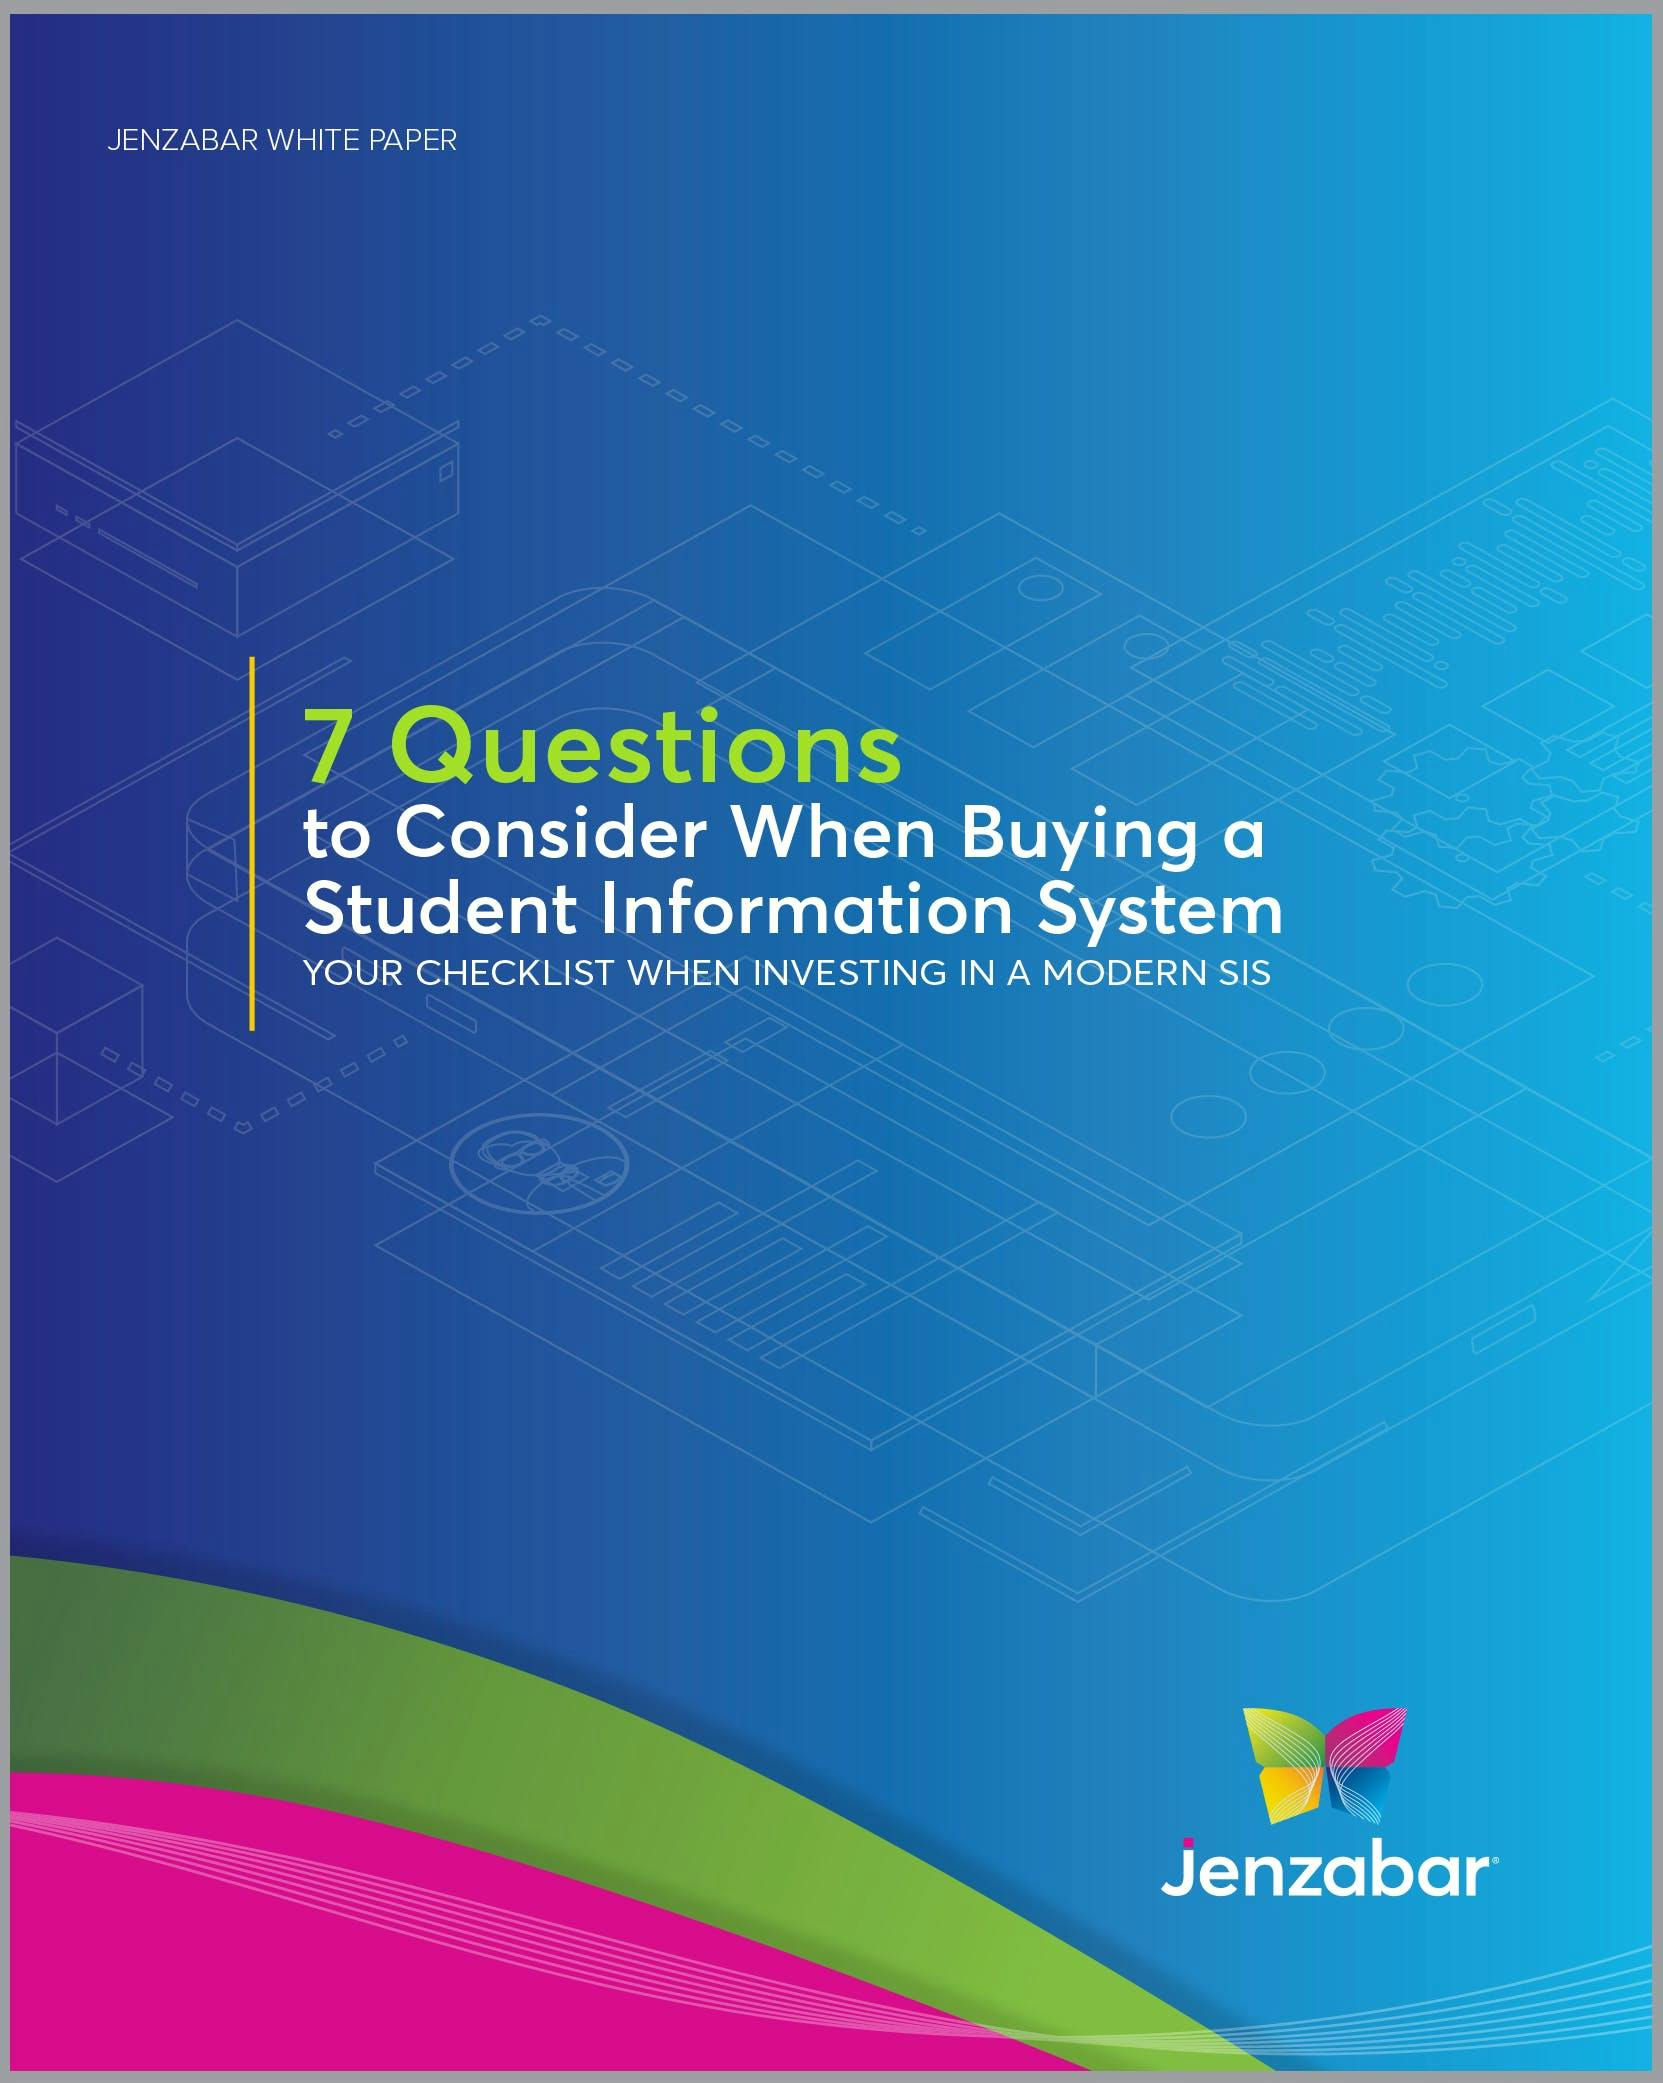 7 Questions to Consider When Buying a Student Information System